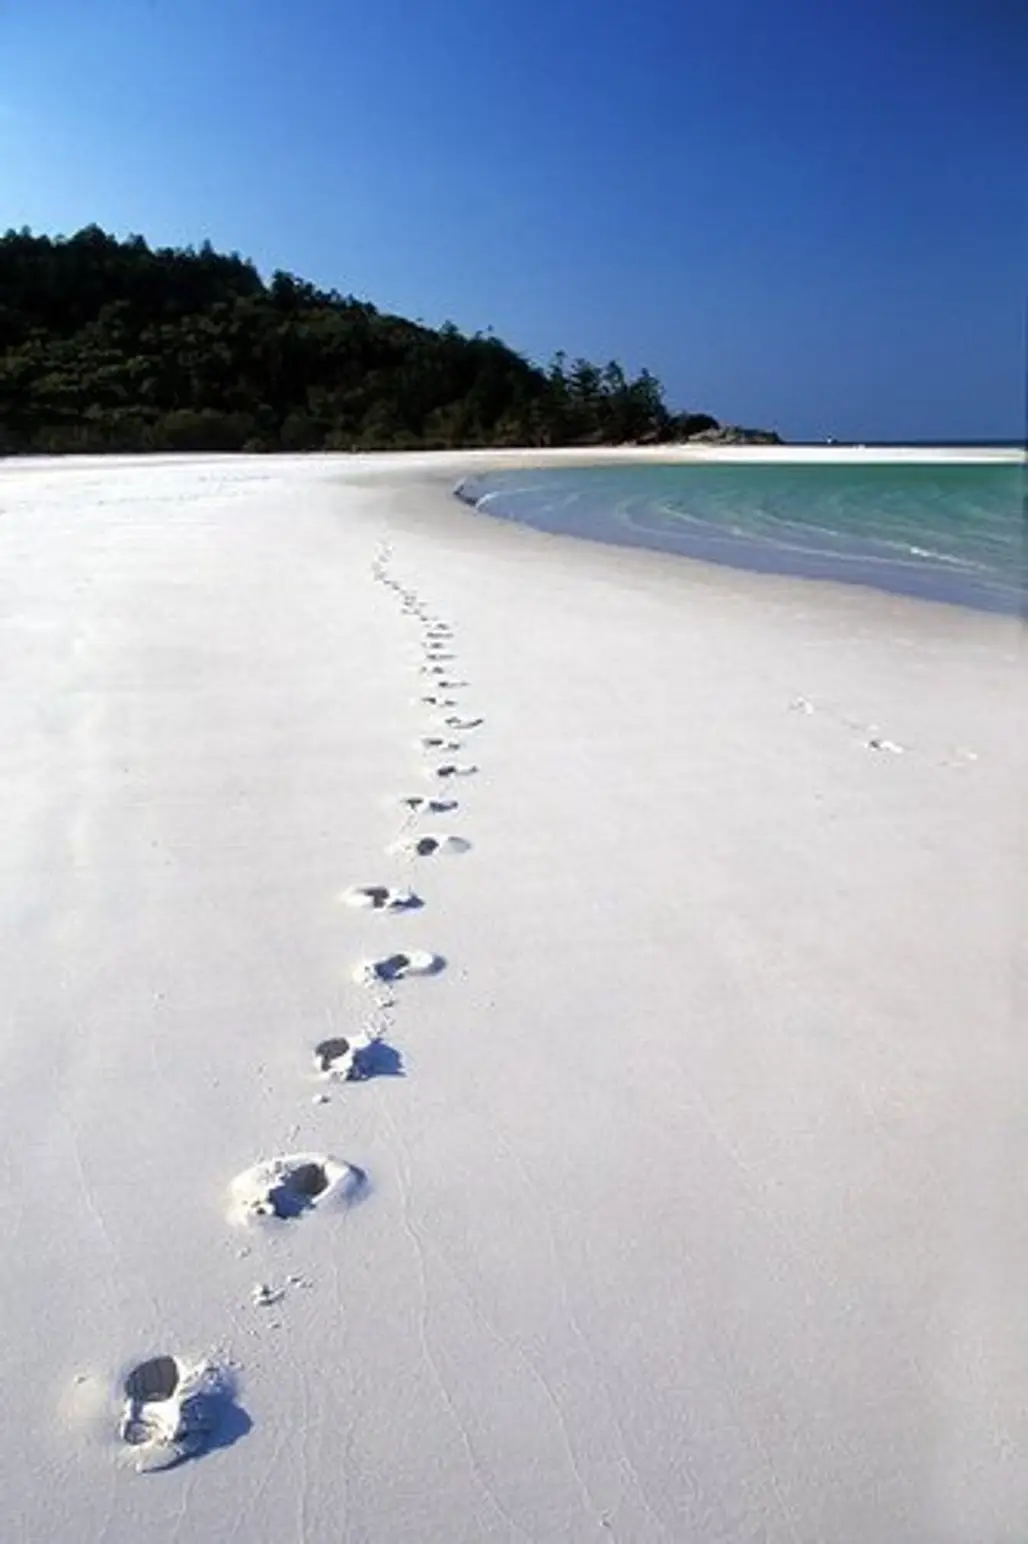 Treading the First Footprints on a Deserted Beach